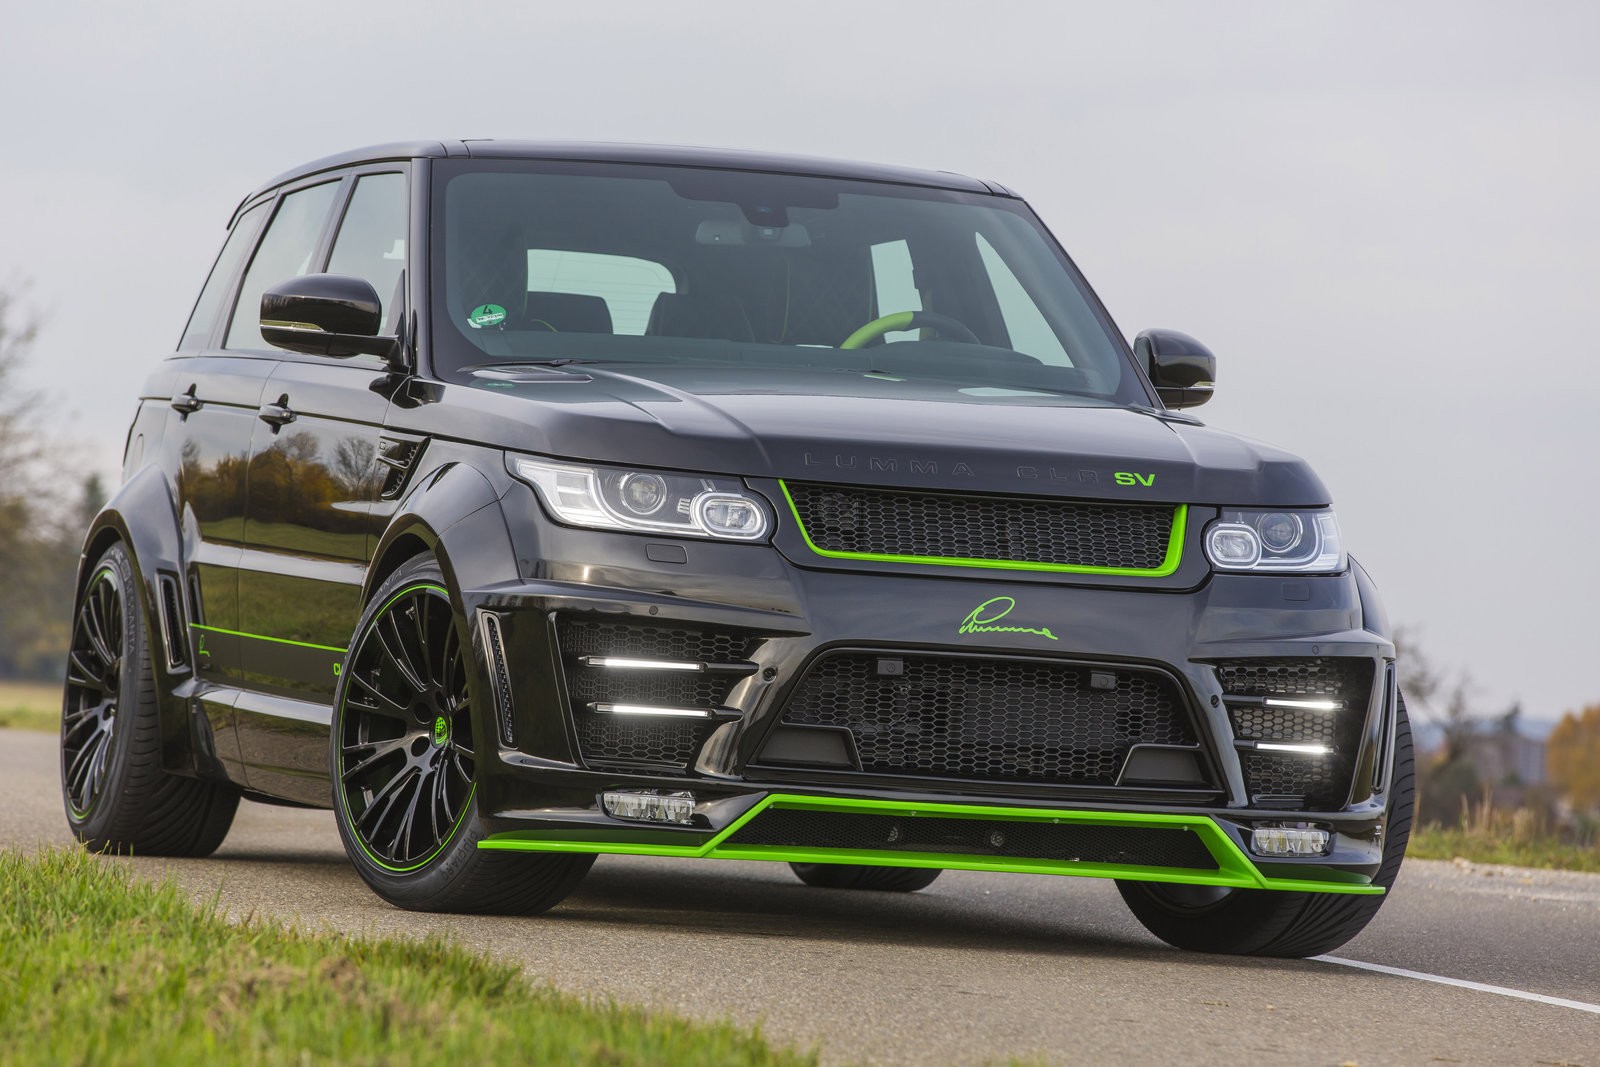 lumma-design-clr-sv-body-kit-for-the-range-rover-sport-comes-with-matching-680-hp-engine_15.jpg